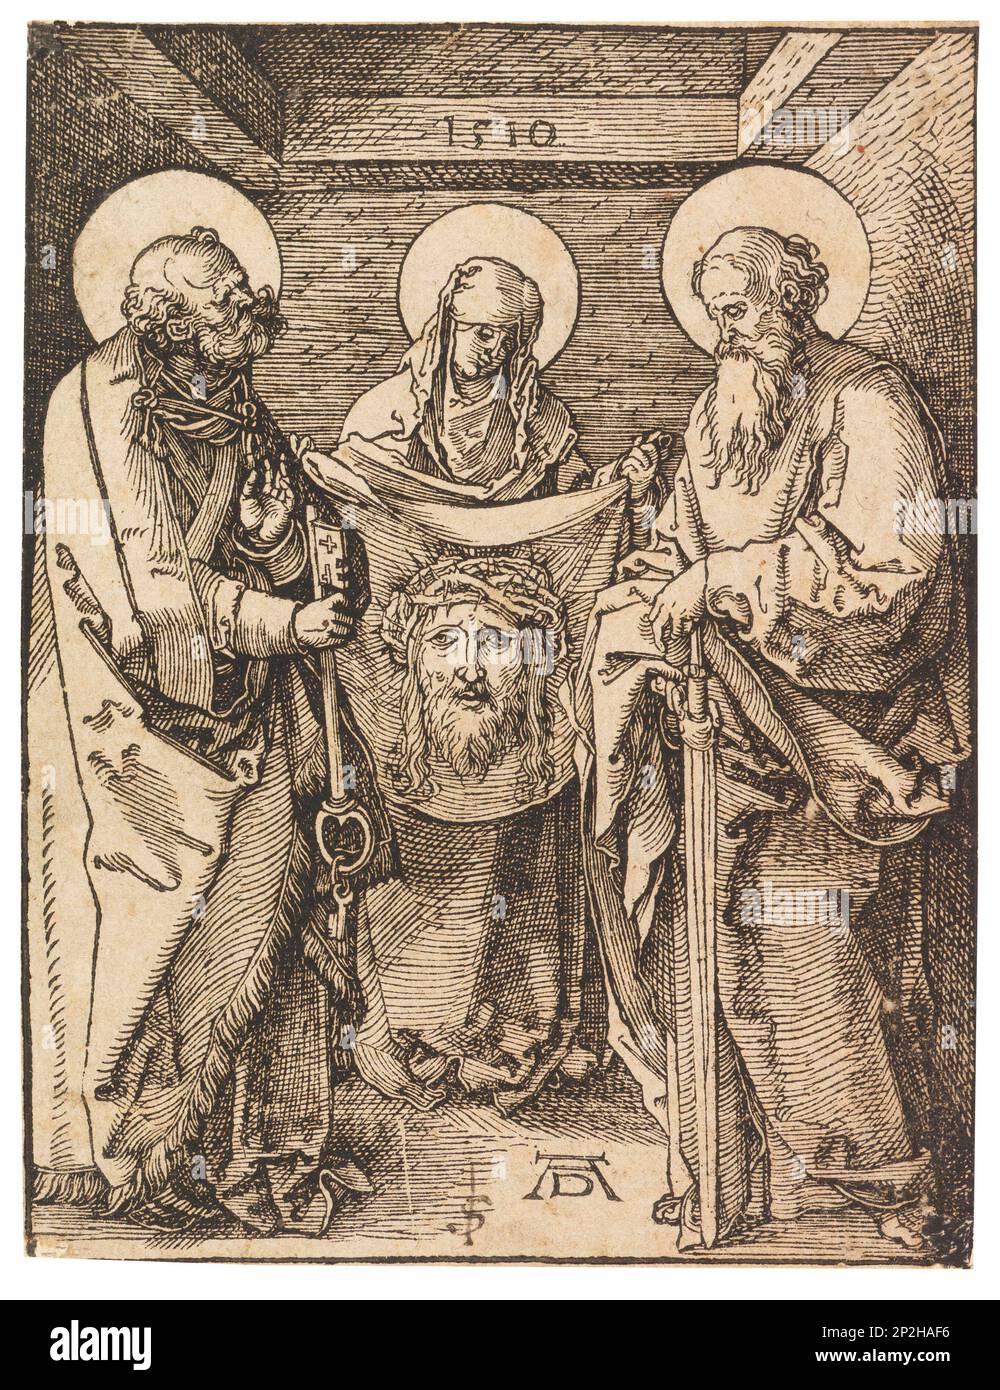 Saint Veronica between Saints Peter and Paul, 1510. Private Collection. Stock Photo